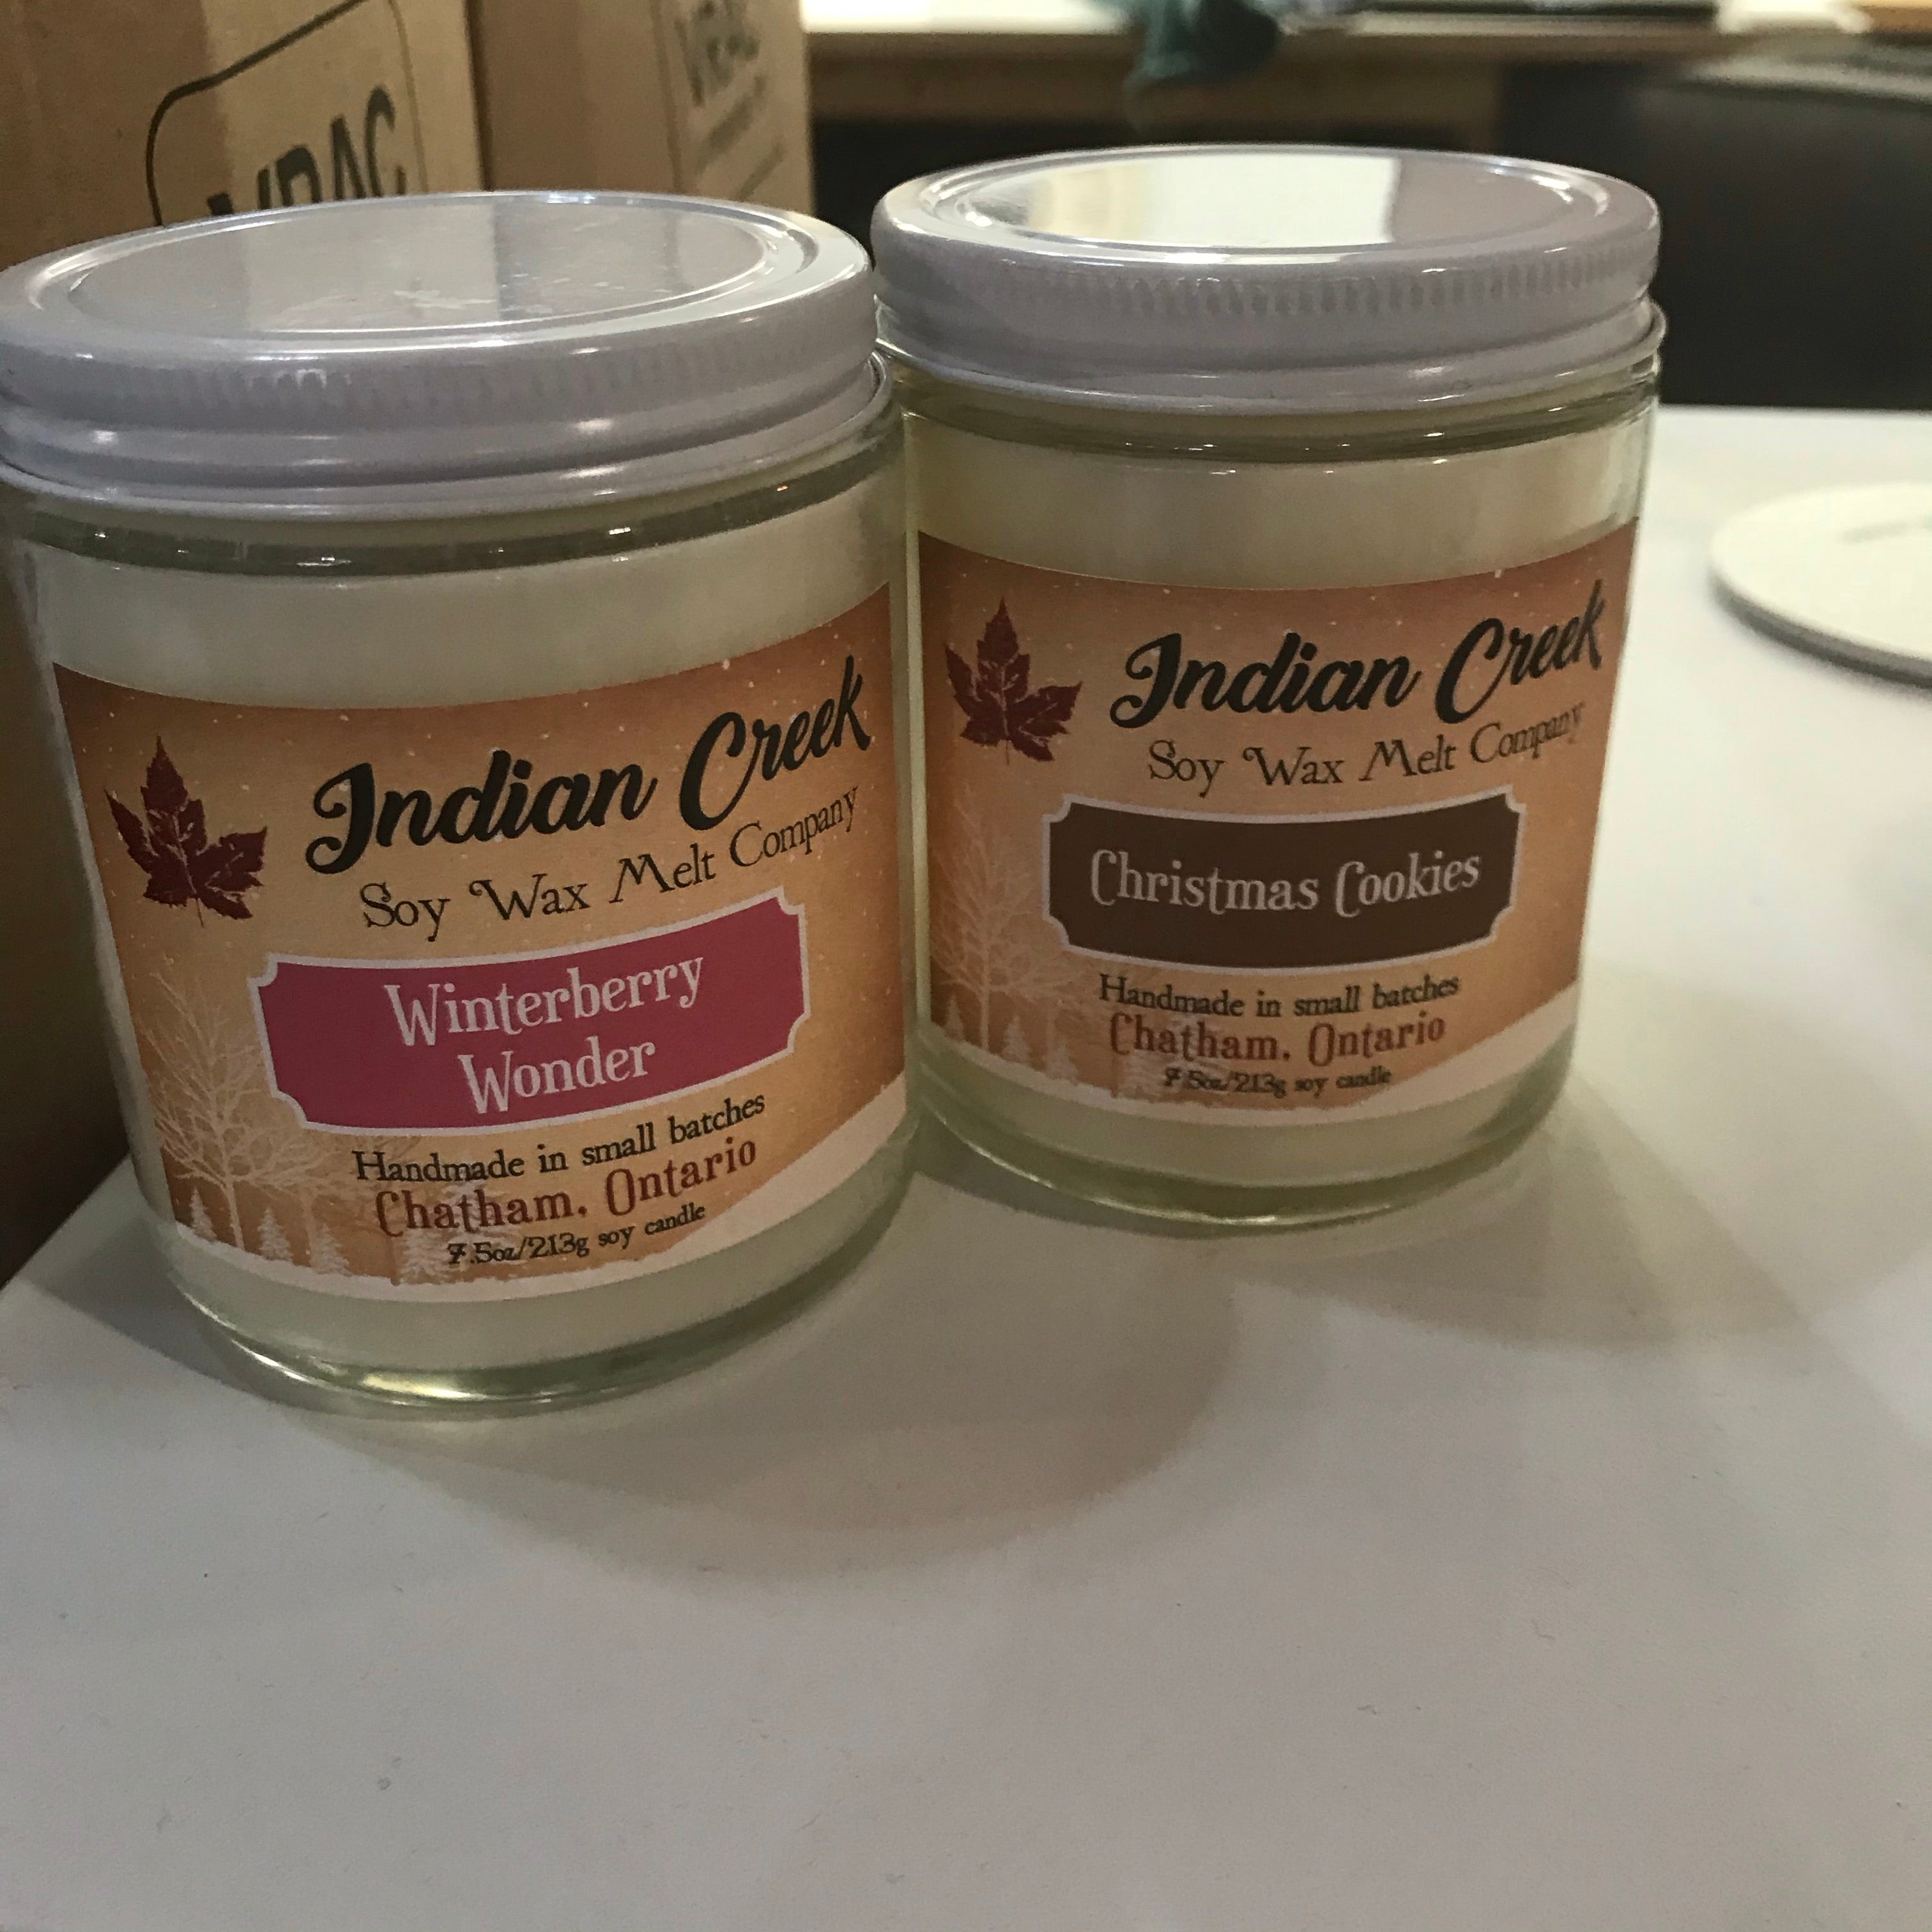 Candles by Indian Creek Soy Wax Melt Company